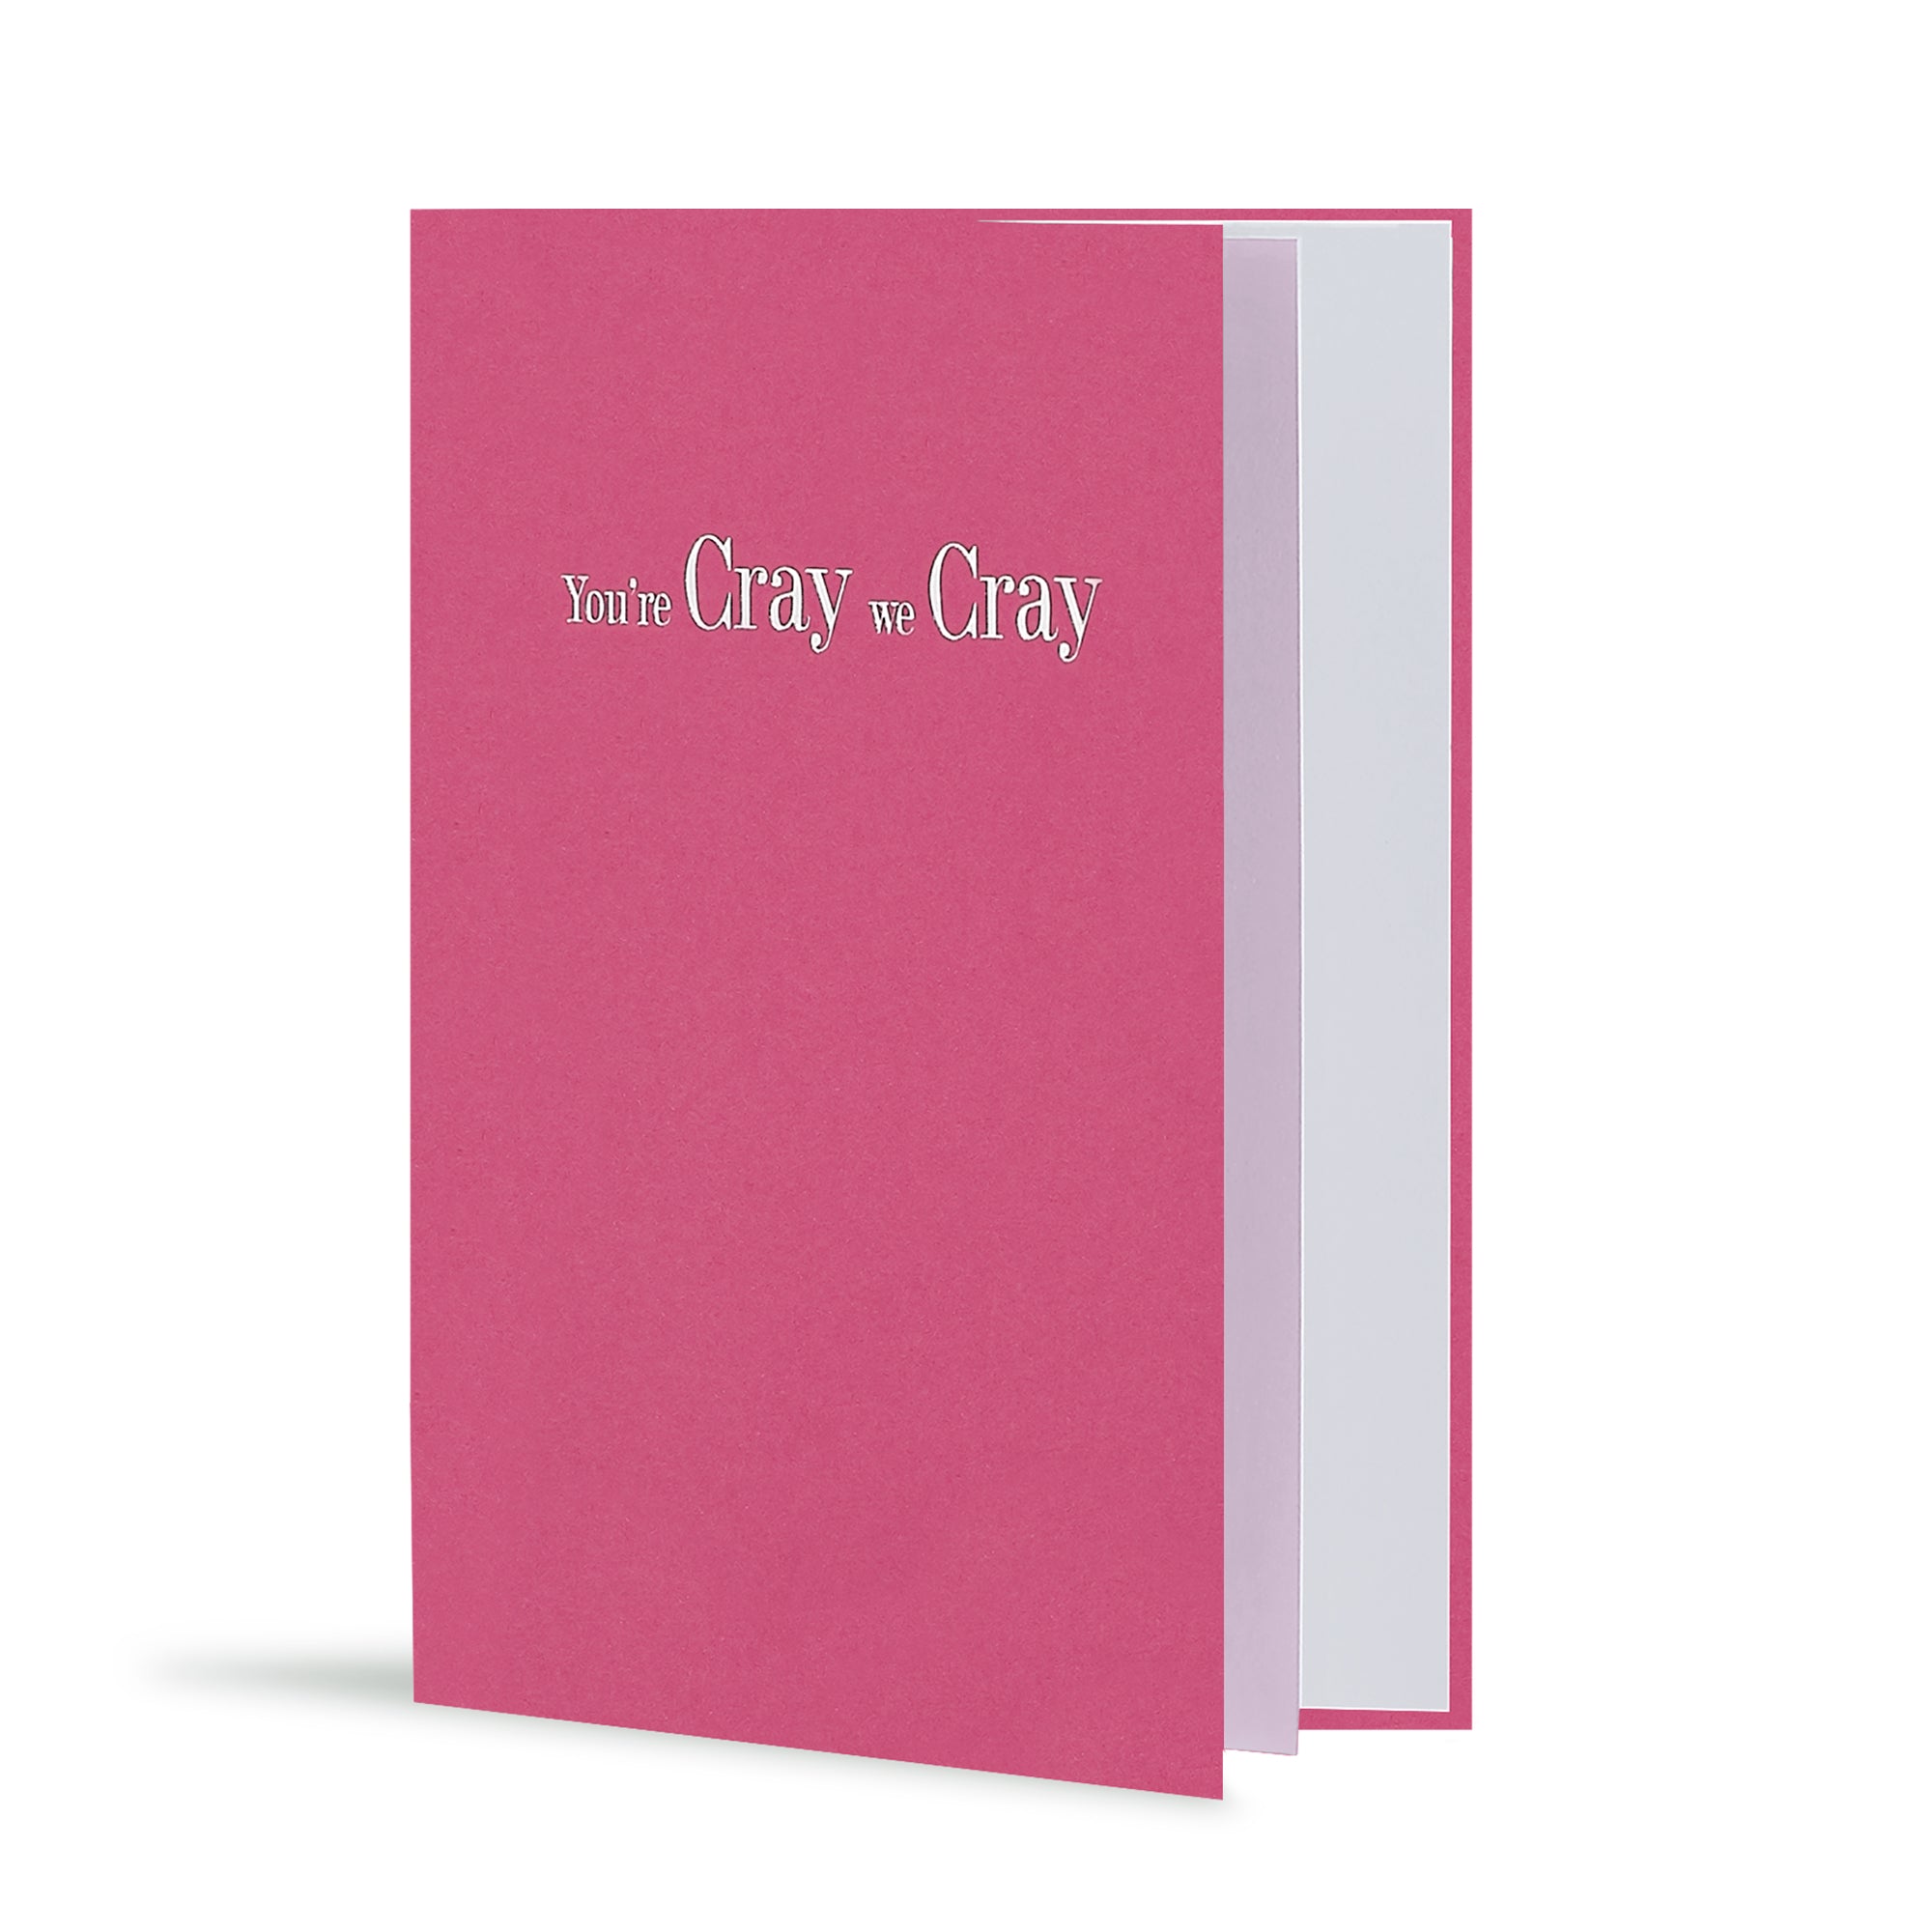 You're Cray We Cray Greeting Card in Ashy Pink, Side